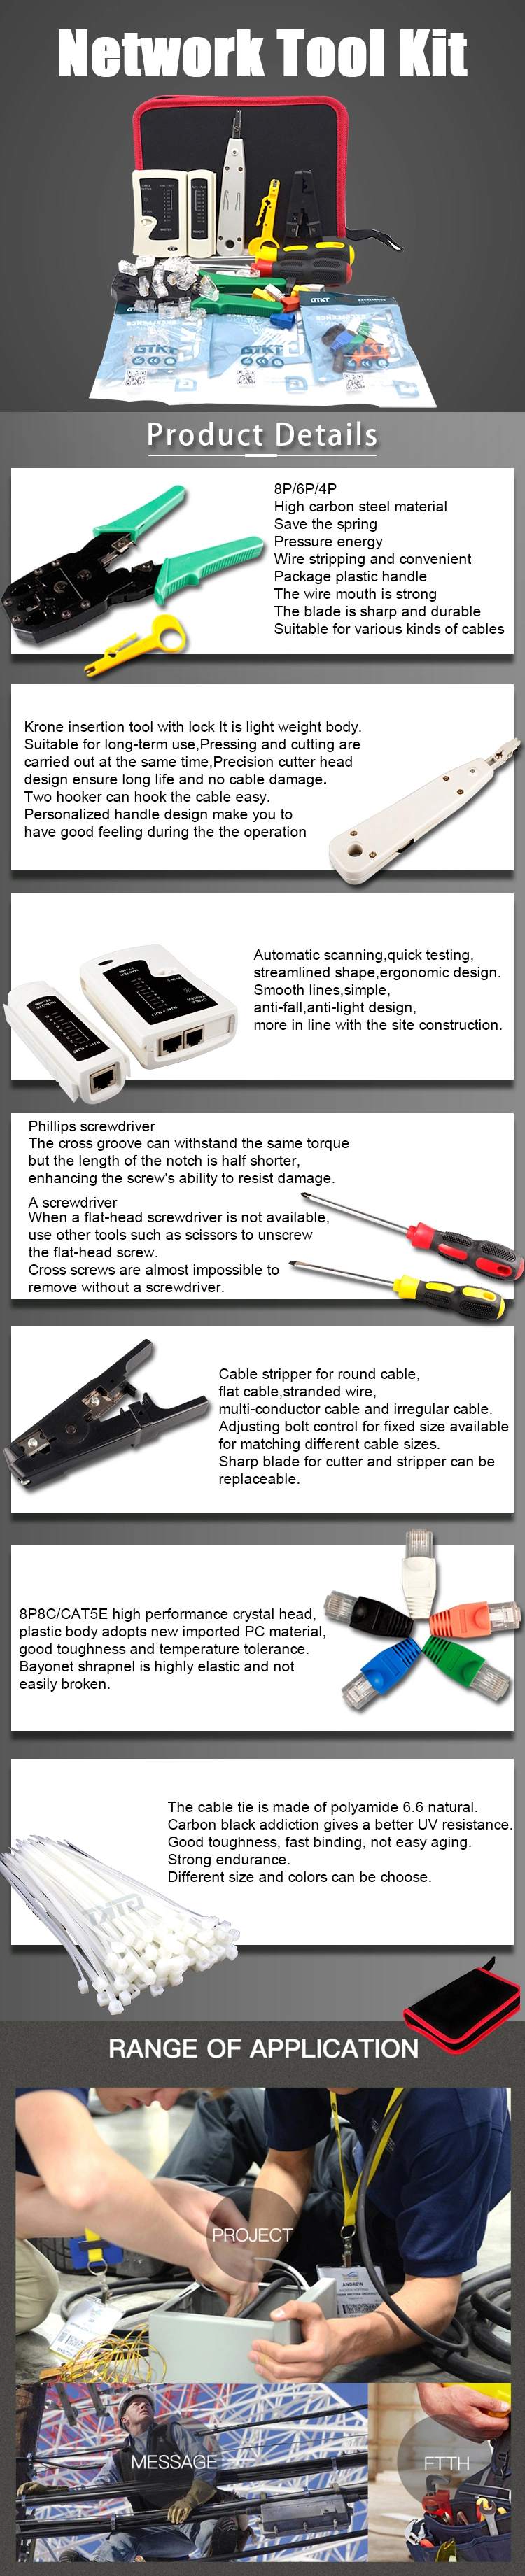 Gcabling Computer Tracker Krone Insertion Tool Hand Crimping RJ45 Connector Professional Technician Network Tool Kit